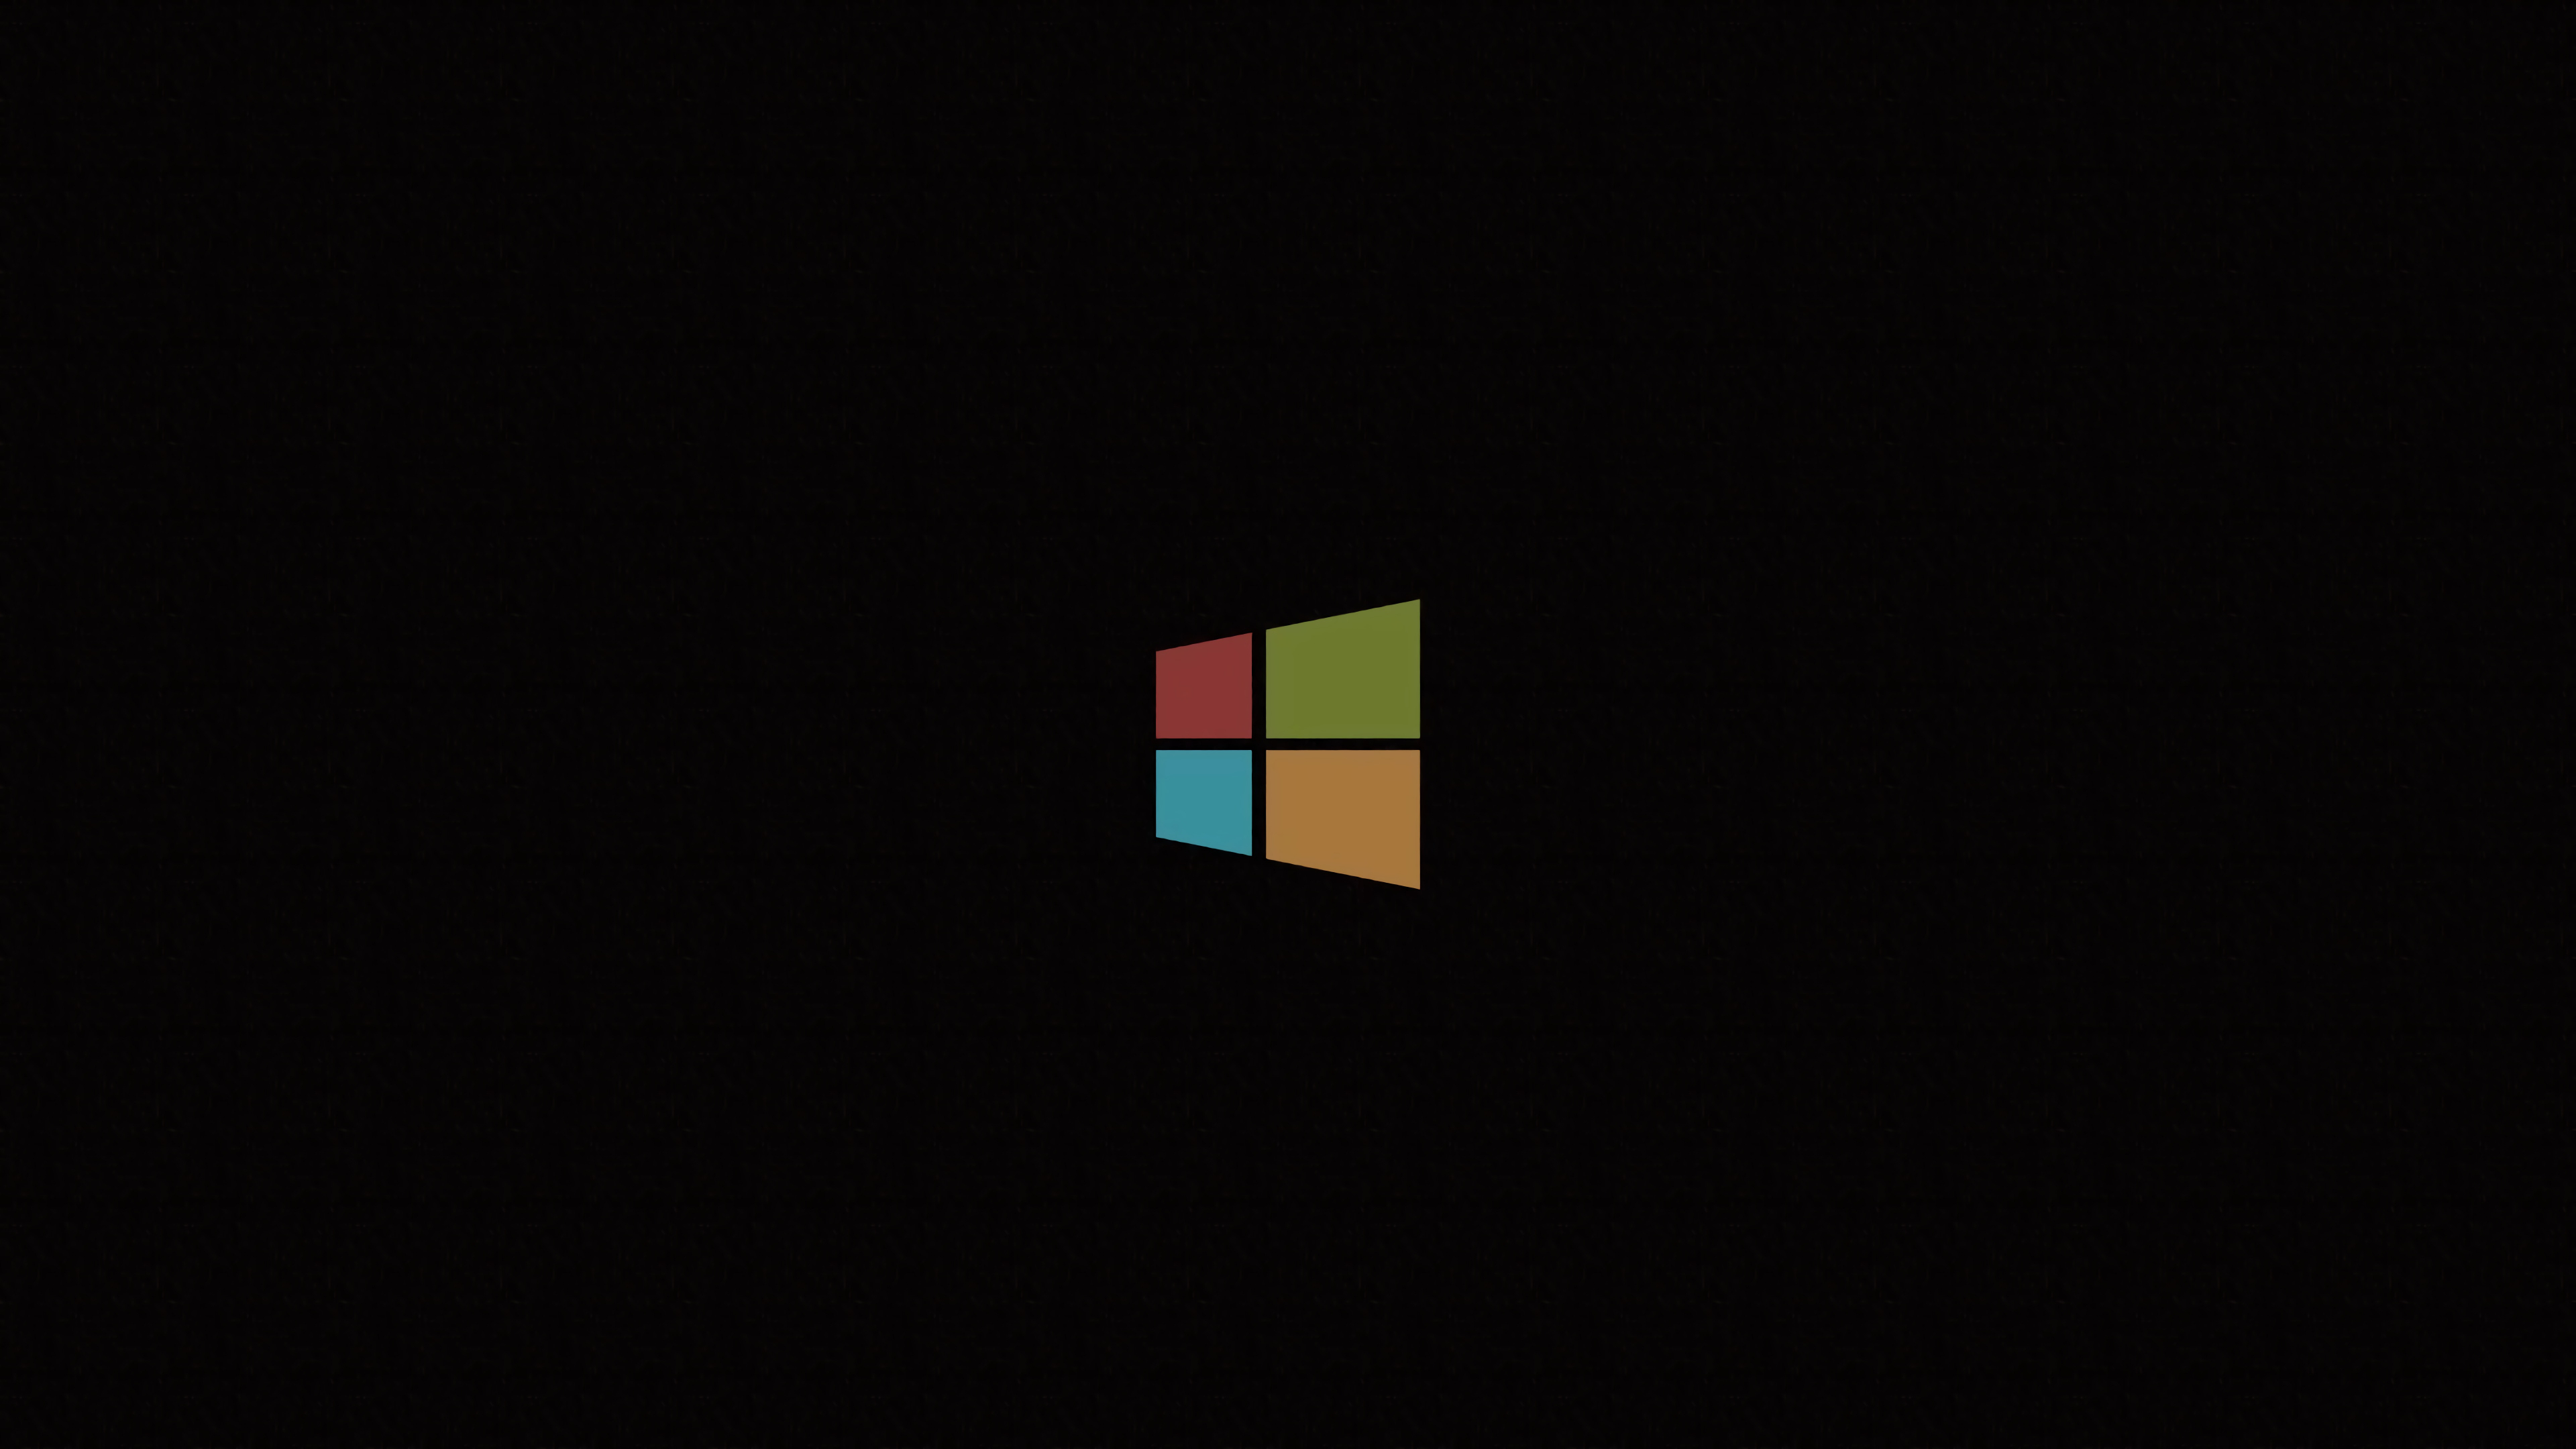 Windows 10 Minimalist 4k Wallpaper,HD Computer Wallpapers,4k Wallpapers ,Images,Backgrounds,Photos and Pictures